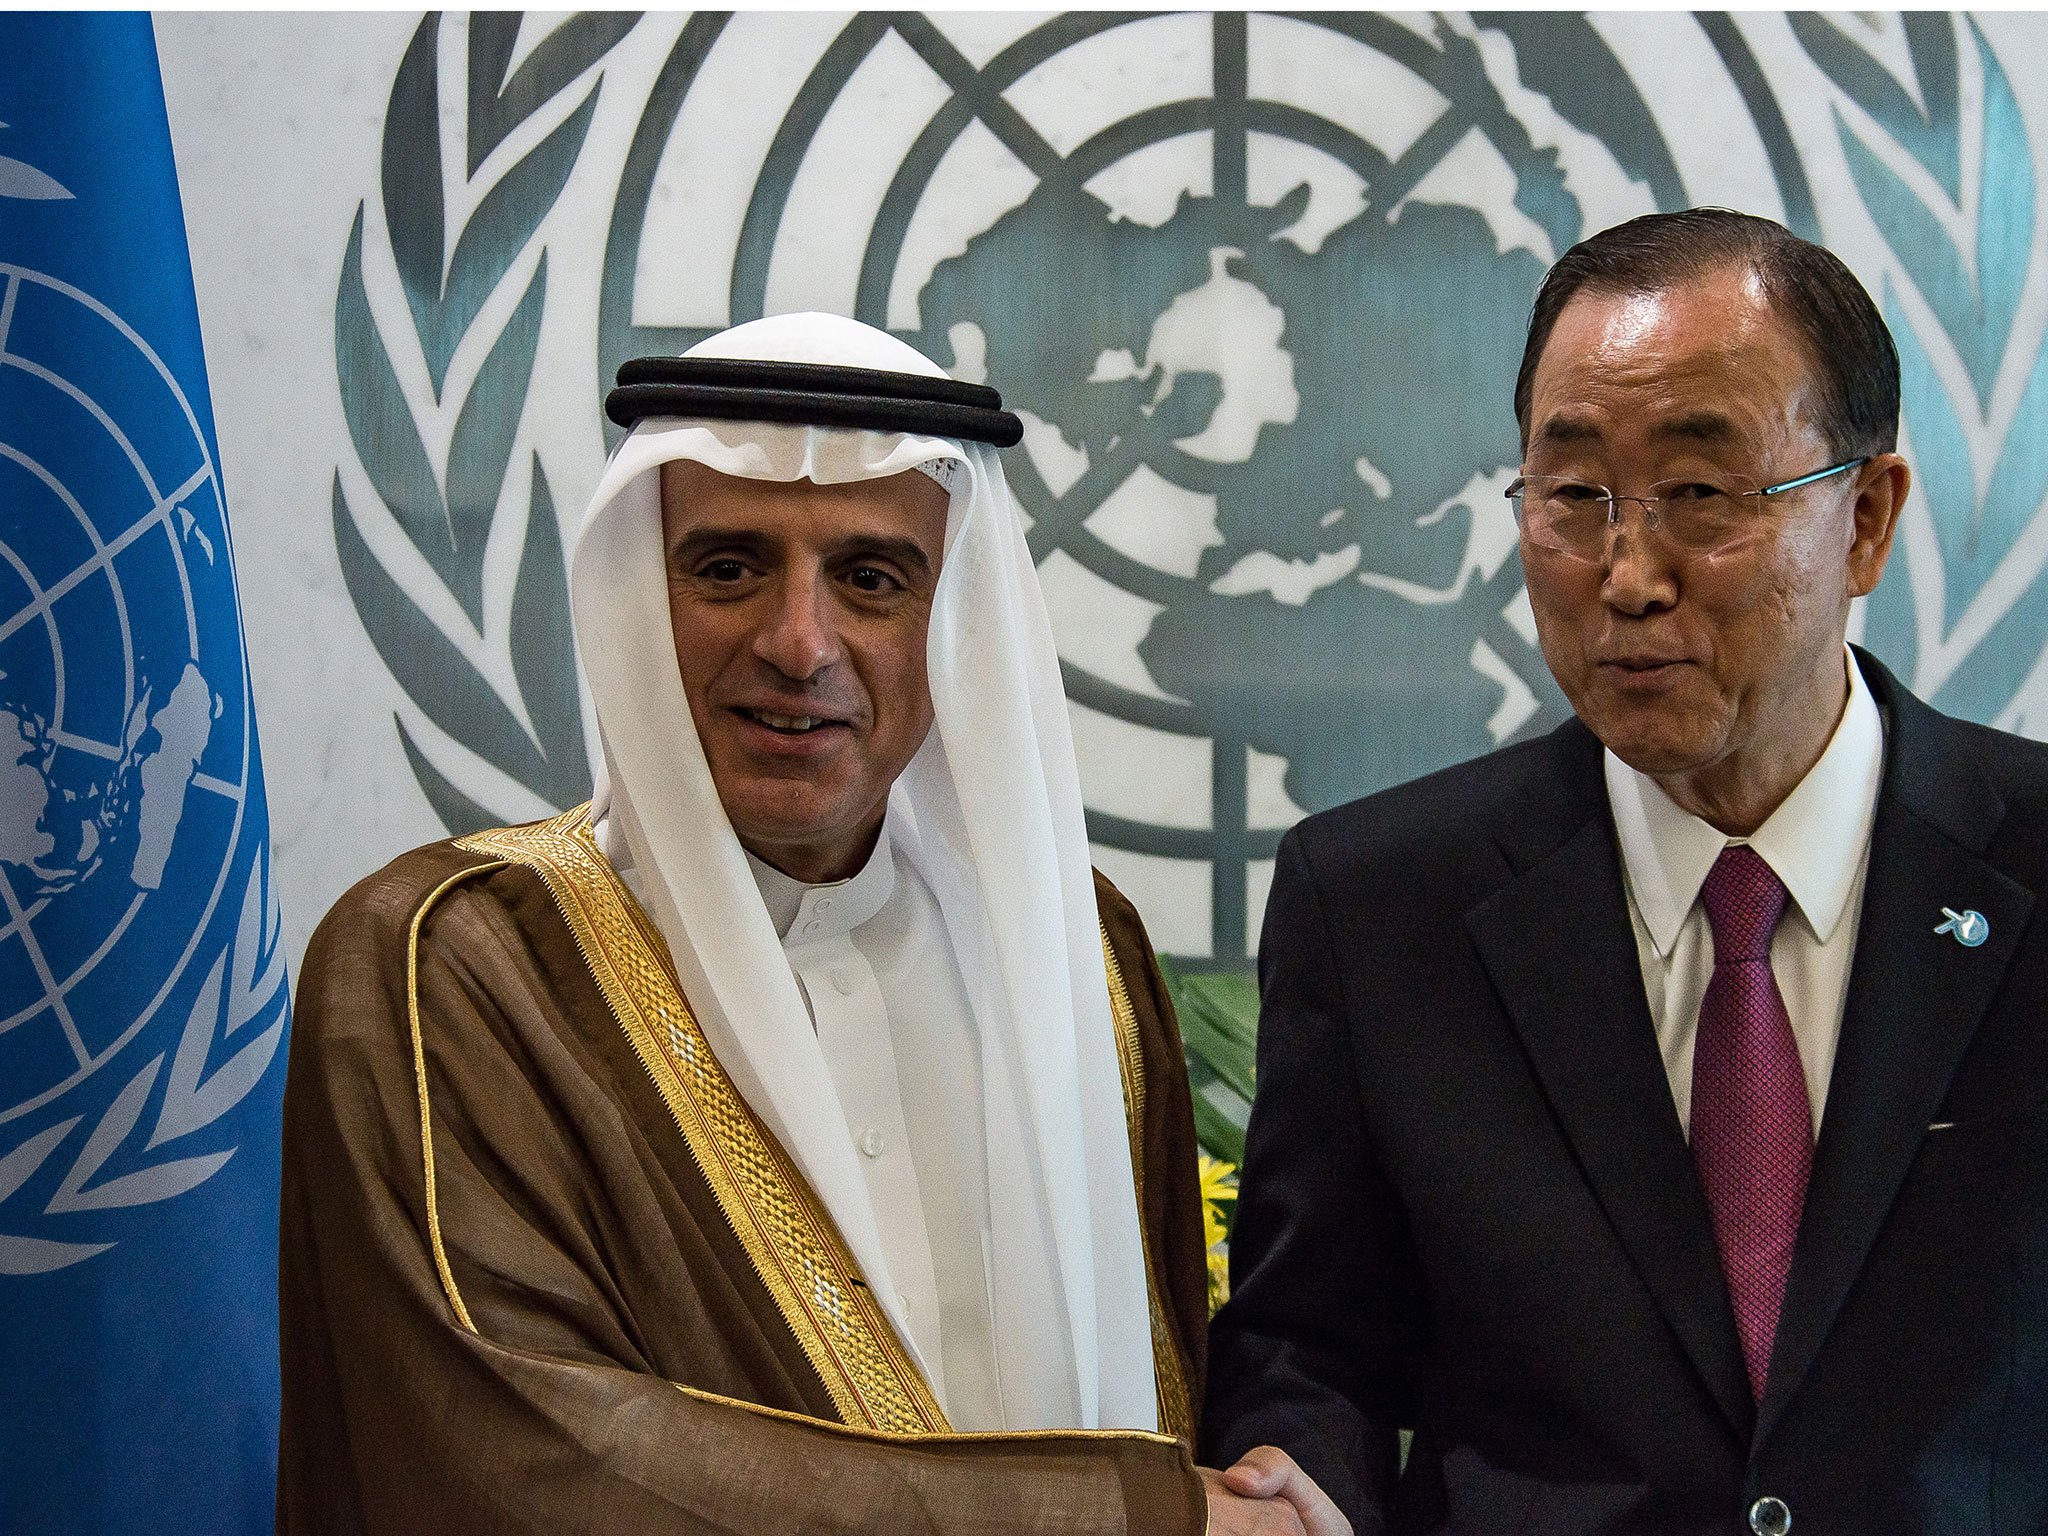 UN Chief’s Legacy at Risk after Caving in to Saudi Pressure